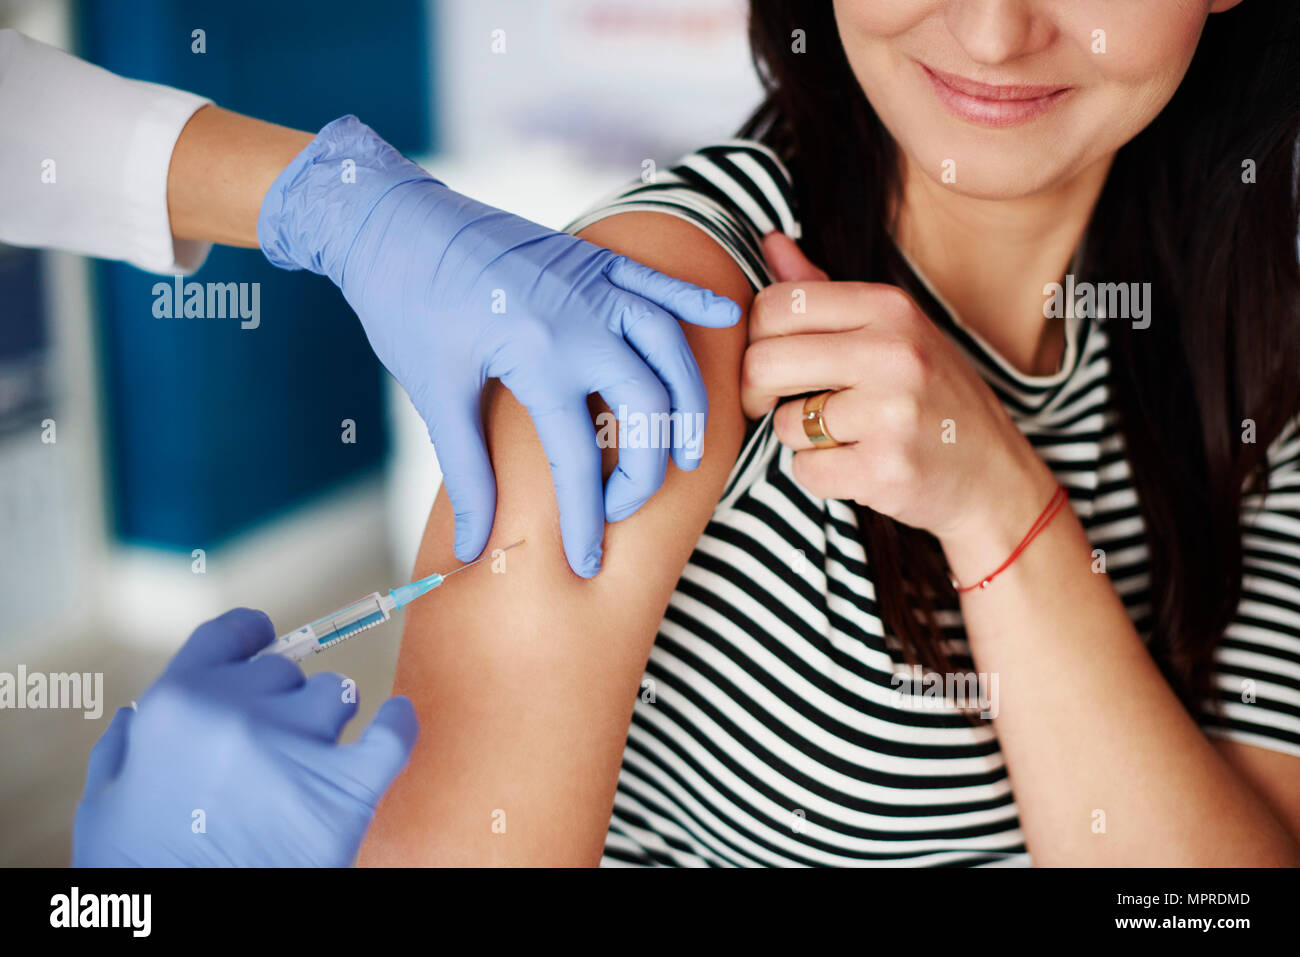 Woman receiving an injection in her arm Stock Photo